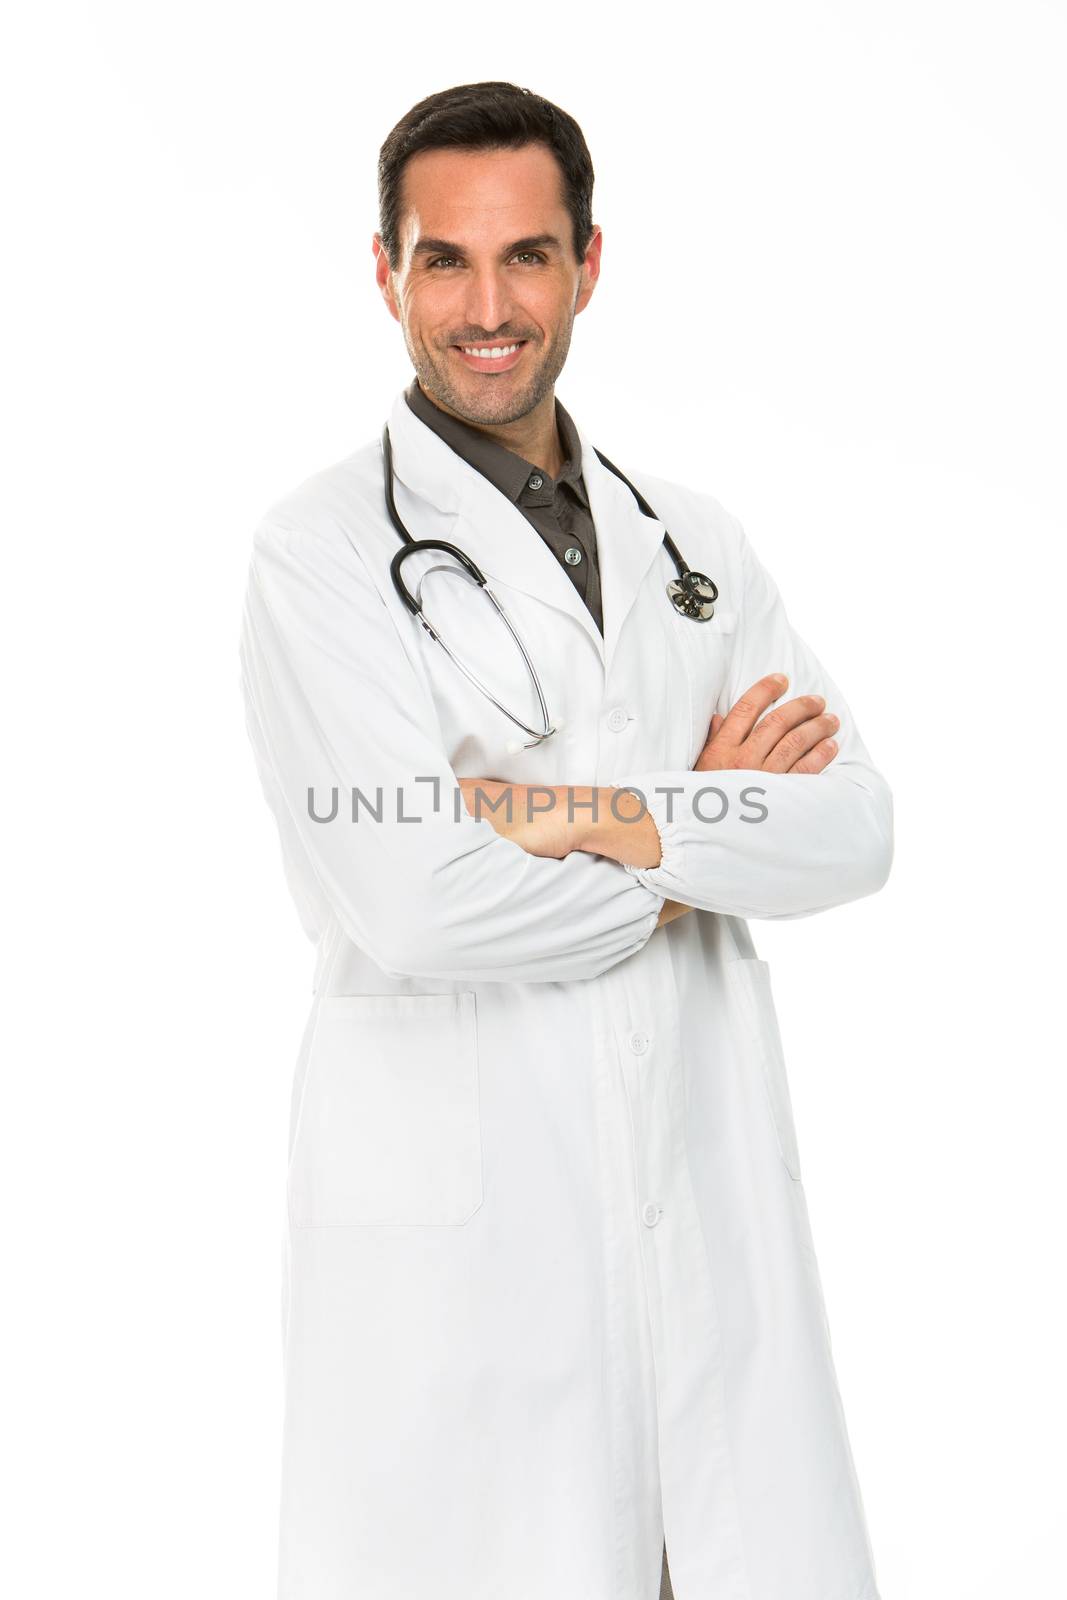 Half length portraif of a male doctor, smiling at camera with crossed arms and stethoscope